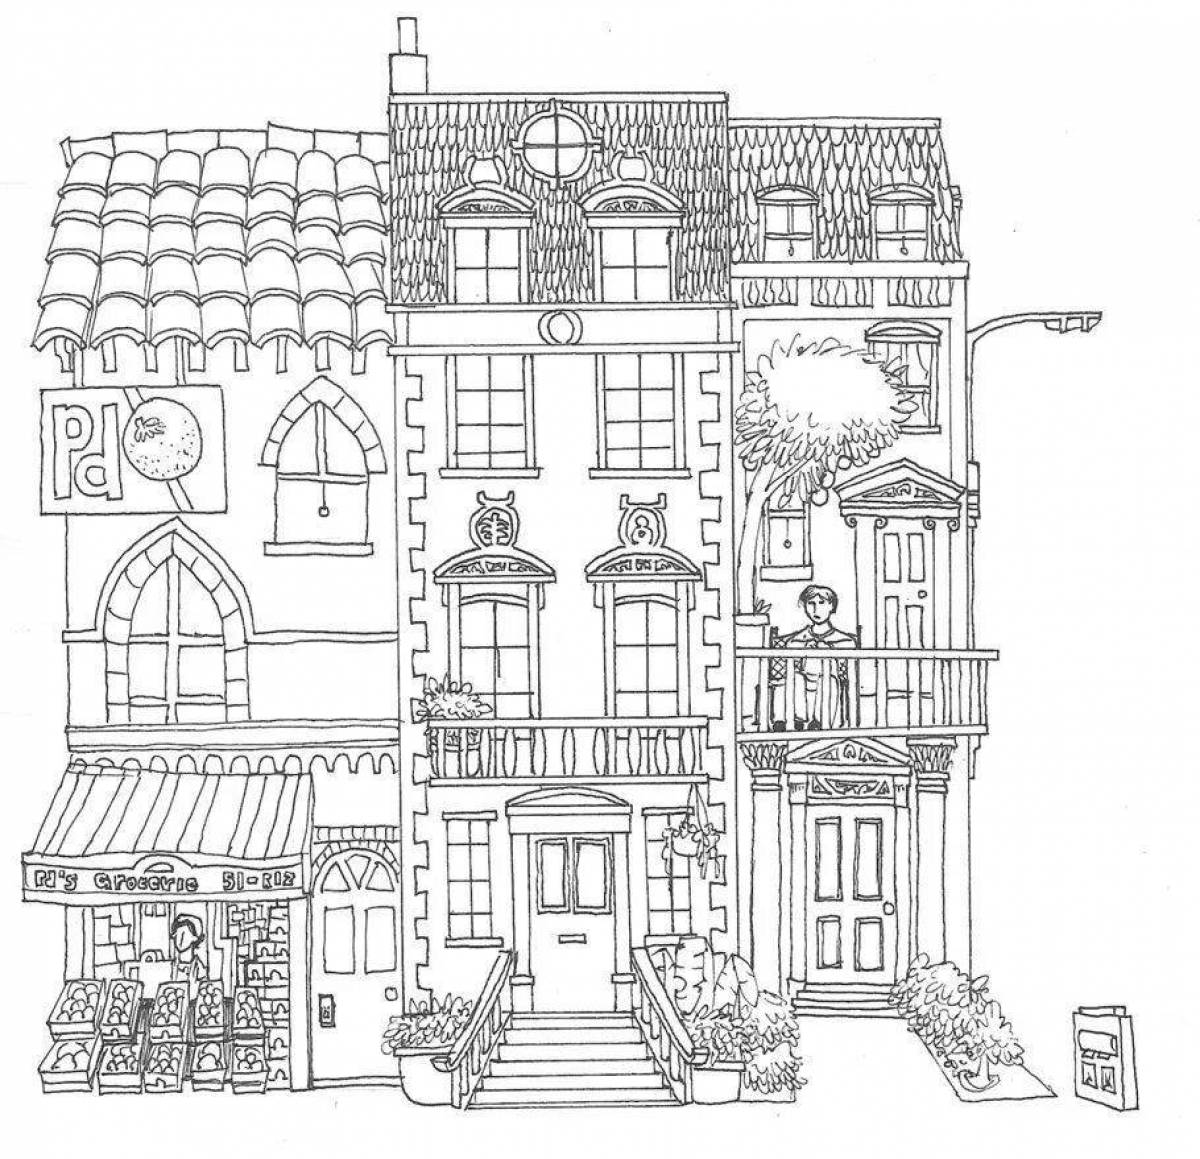 Coloring book Joyful house in section